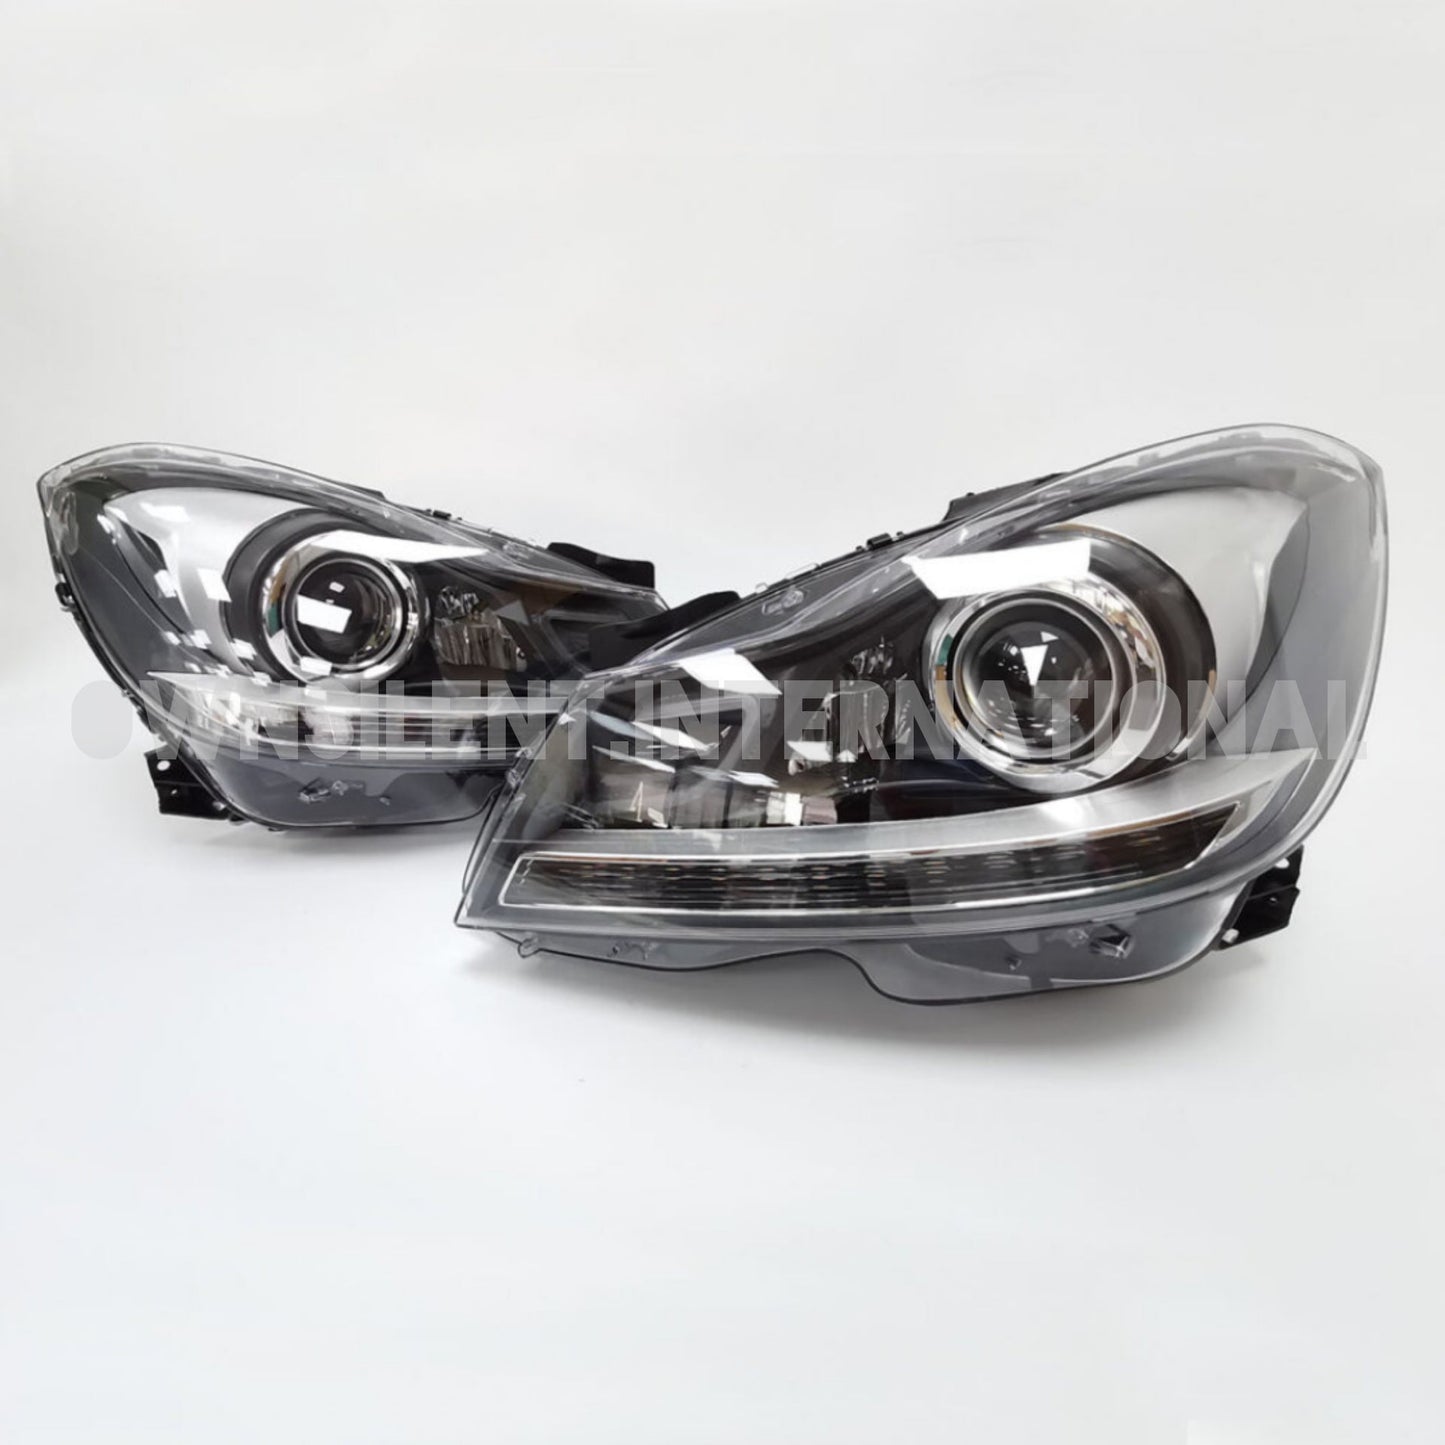 W204 Headlight Upgrade DRL LED Tube Projector Fits For 2012-2014 Mercedes C180, C250, C300, C350, C63